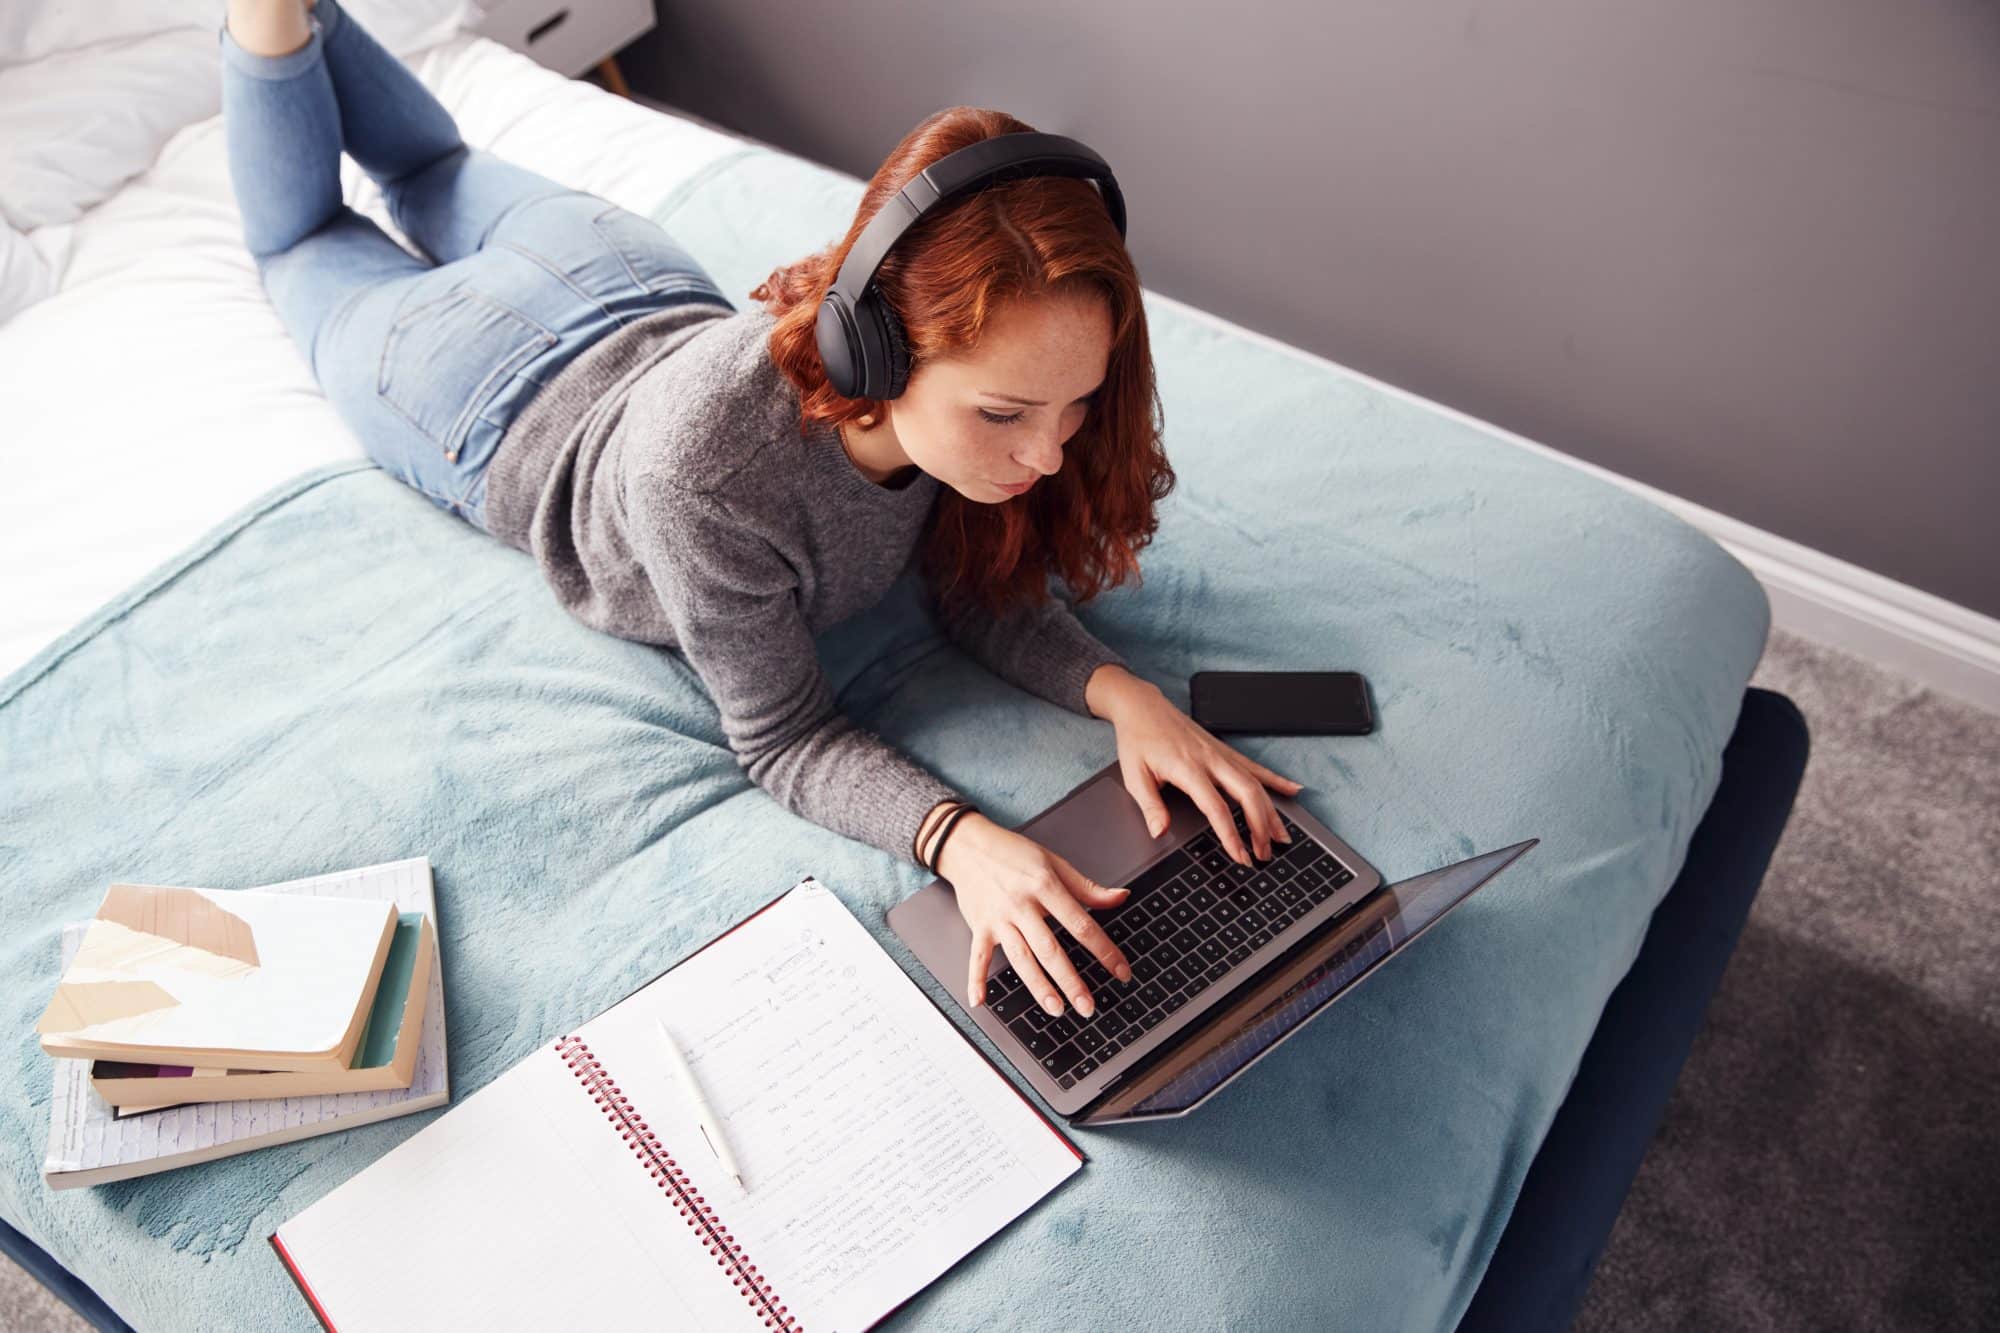 looking down on female college student wearing headphones lying on bed working on laptop